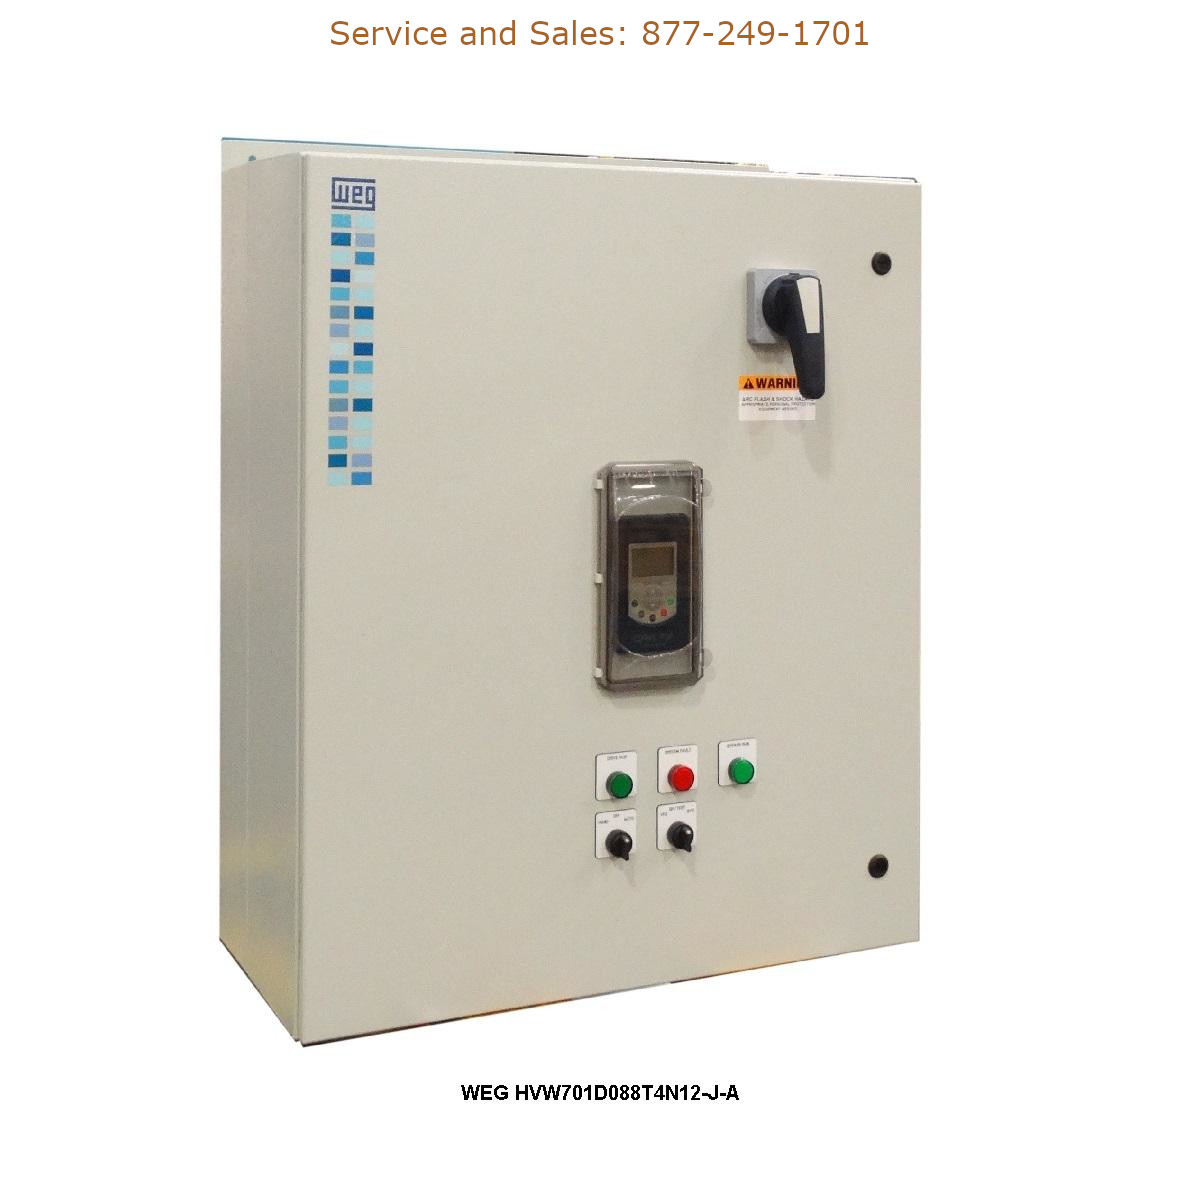 WEG HVW701D088T4N12-J-A WEG Model Number HVW701D088T4N12-J-A WEG Drives, Variable Speed Drives Repair Service, Troubleshooting, Replacement Parts https://gesrepair.com/wp-content/uploads/2022/WEG/WEG_HVW701D088T4N12-J-A_Drives_Variable_Speed_Drives.jpg